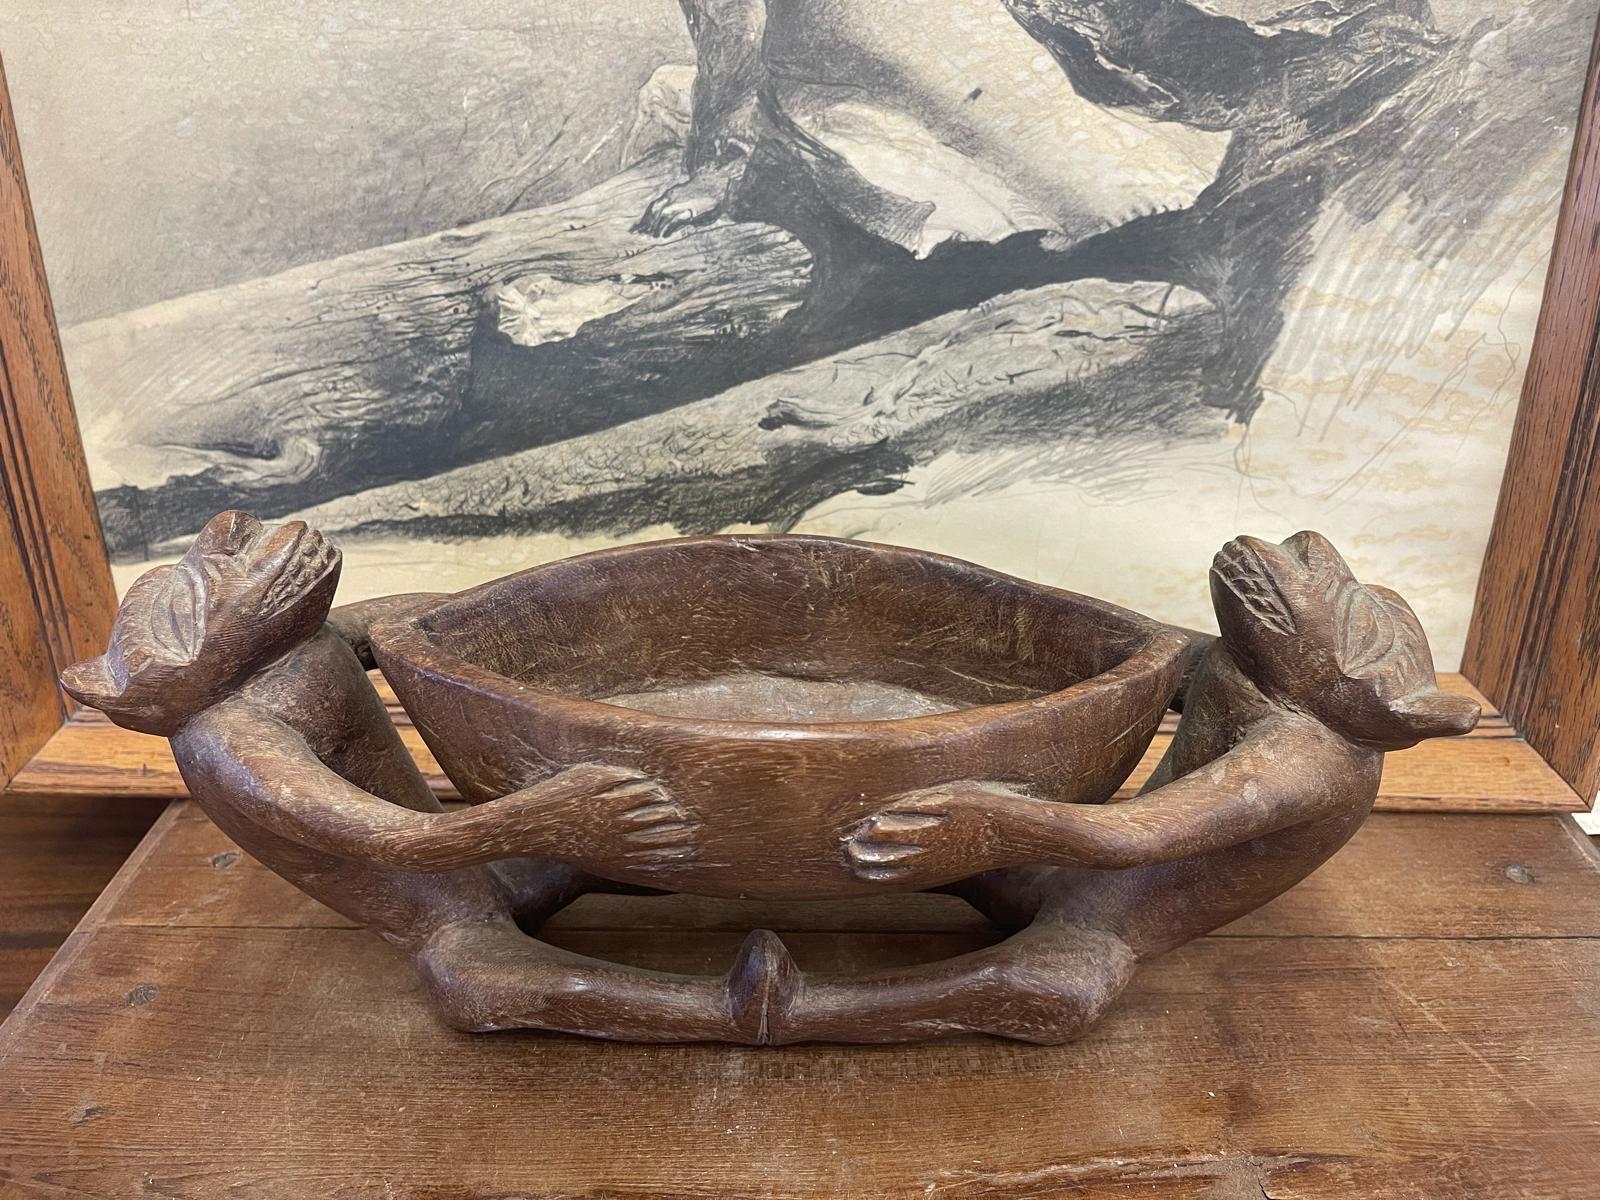 Possibly African Origin. Two Creature Figurines Wrap around the Bowl. Nice aging to the Wood creating a Gorgeous Patina. Hand Crafted using Solid Wood. Vintage Condition Consistent with Age as Pictured.

Dimensions. 16 W ; 5 1/2 D ; 7 H